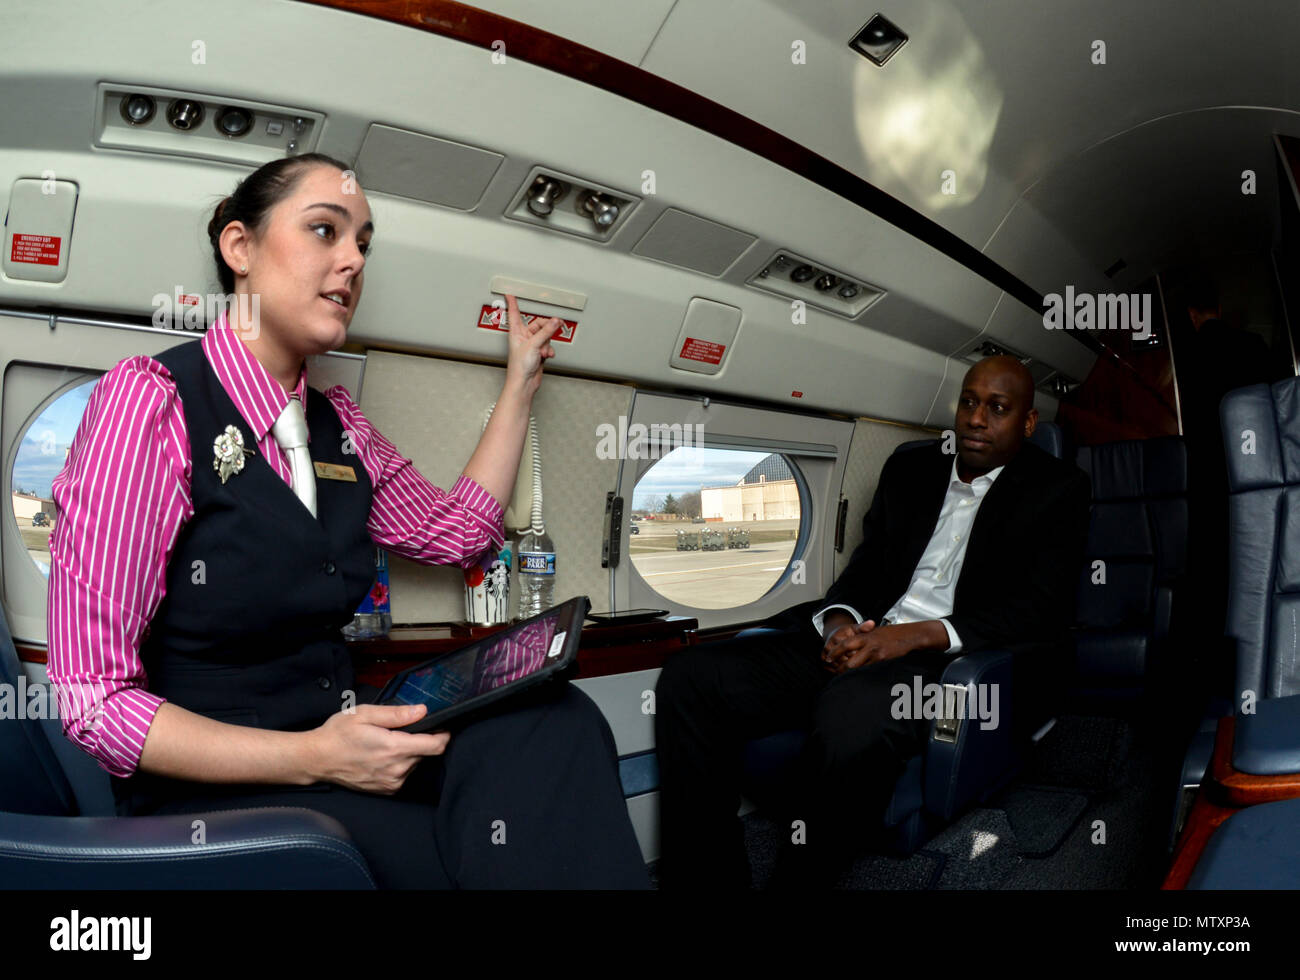 170130-F-WU507-008: Staff Sgt. Autumn Murphy, 99th Airlift Squadron flight attendant, points out the emergency exits during a C-20B pre-flight safety brief at Joint Base Andrews, Maryland, Jan. 27, 2017. FAs are often praised for their culinary artistry and the uniqueness of preparing full meals while crossing the nation or oceans; however, foremost they are safety experts, and even though she is briefing two mission-essential personnel, Murphy ensures the MEPs receive a full brief prior to taking off for a mission to Panama City, Panama. (U.S. Air Force photo by Senior Master Sgt. Kevin Walla Stock Photo